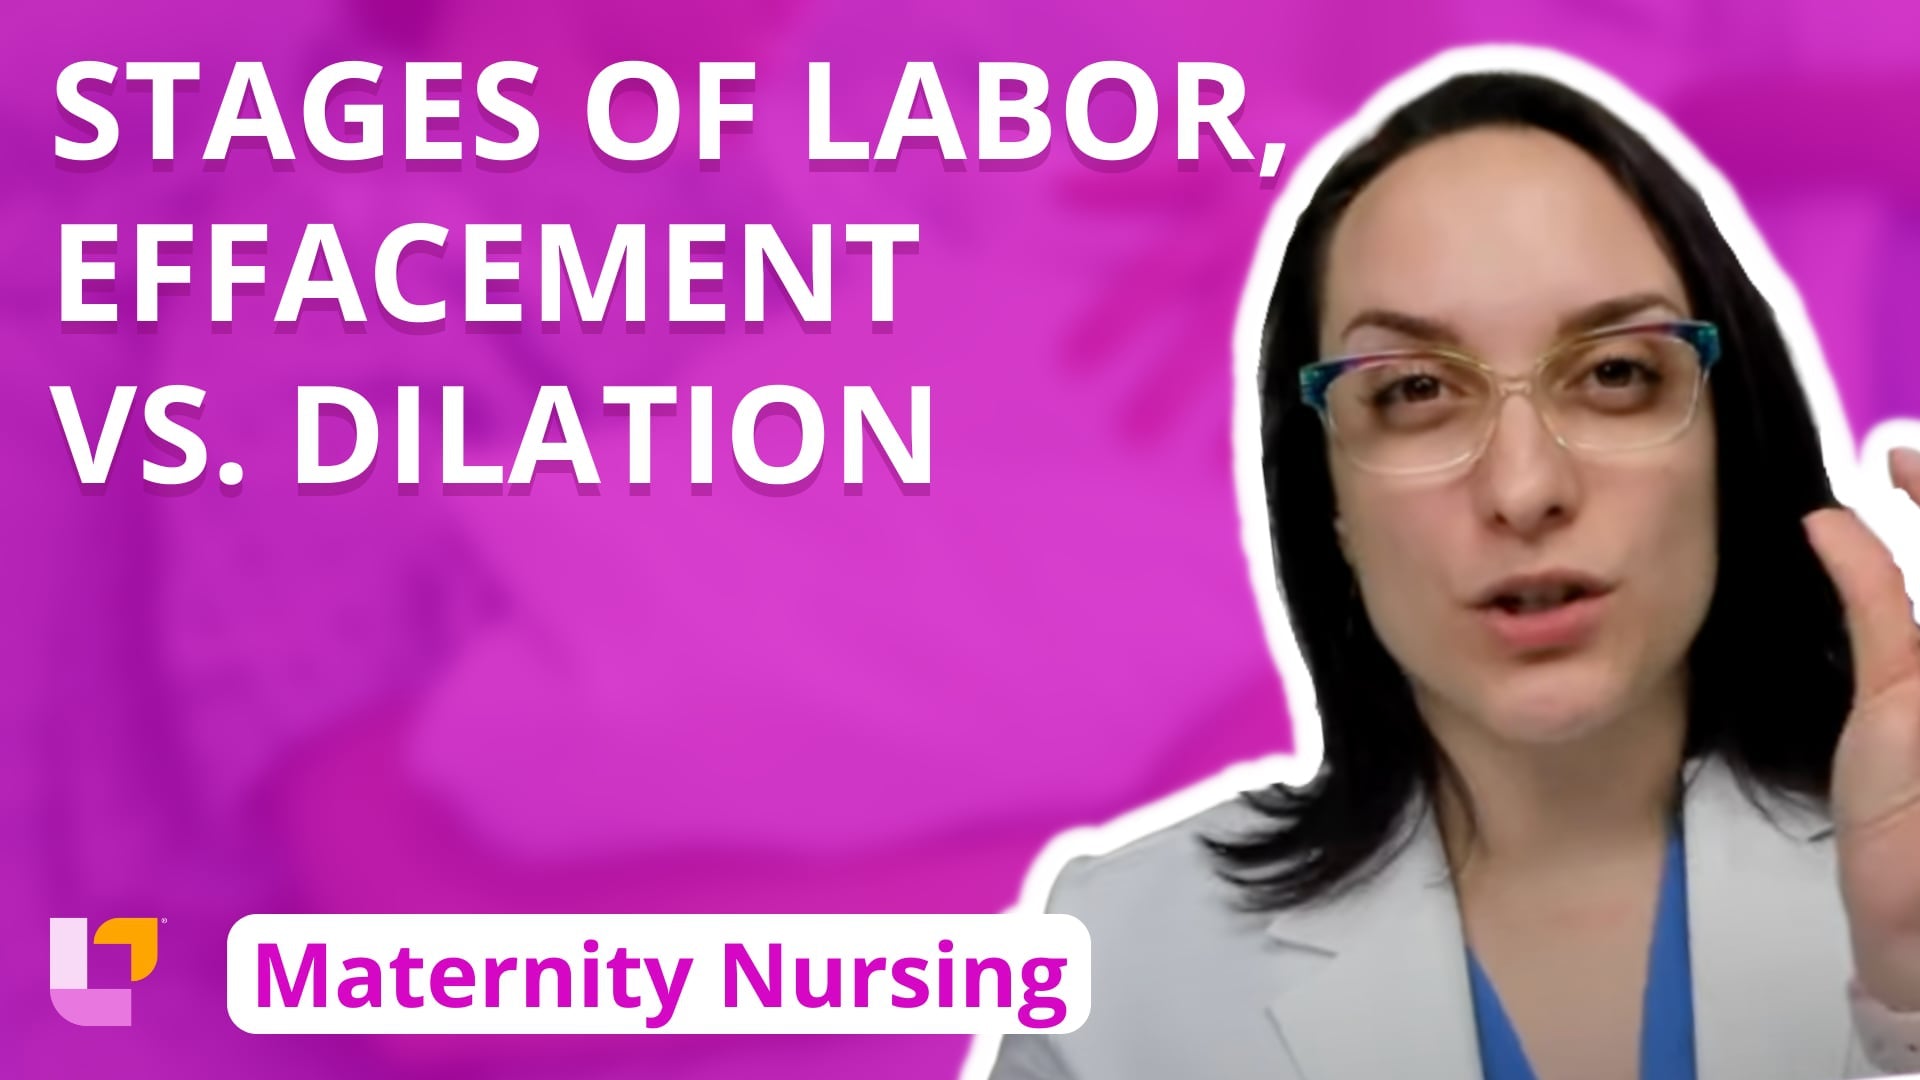 Maternity - L&D, part 3: Stages of Labor, Effacement vs. Dilation - LevelUpRN